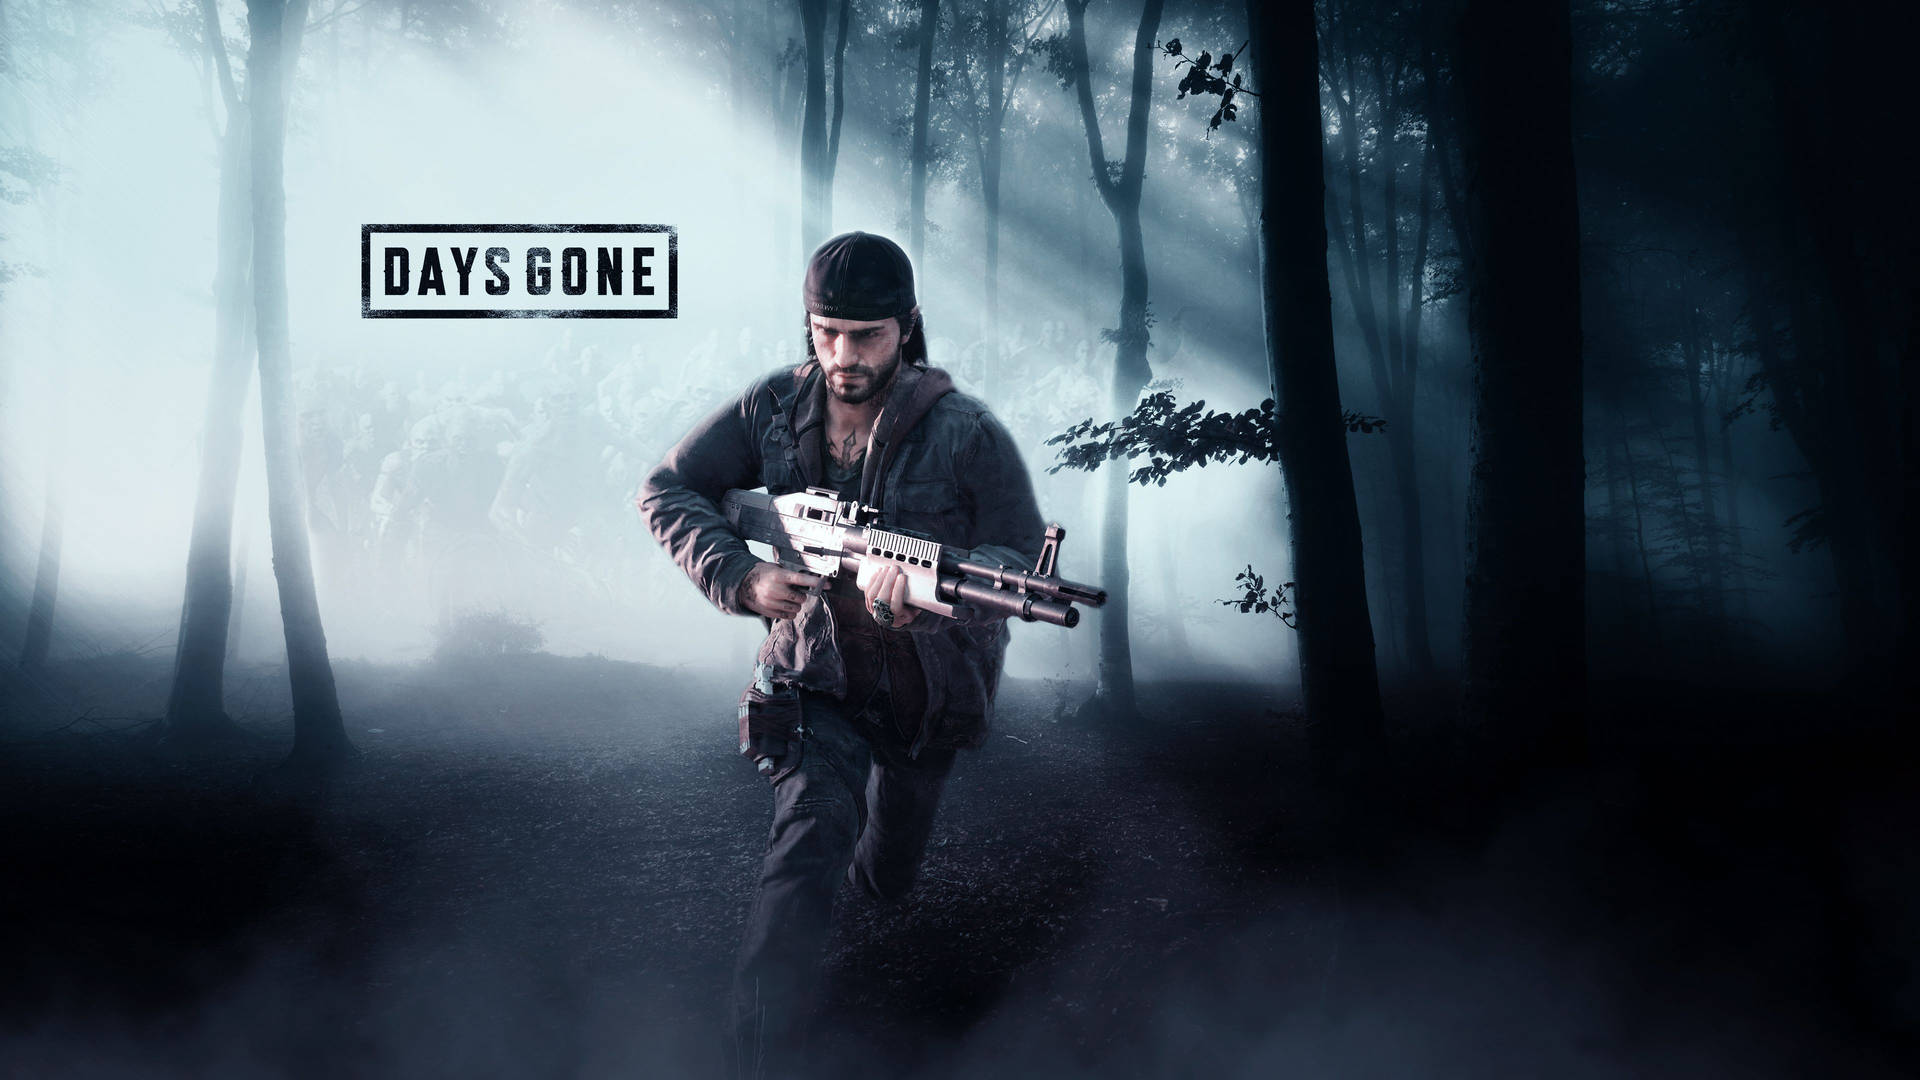 Free Days Gone Wallpaper Downloads, [100+] Days Gone Wallpapers for FREE |  